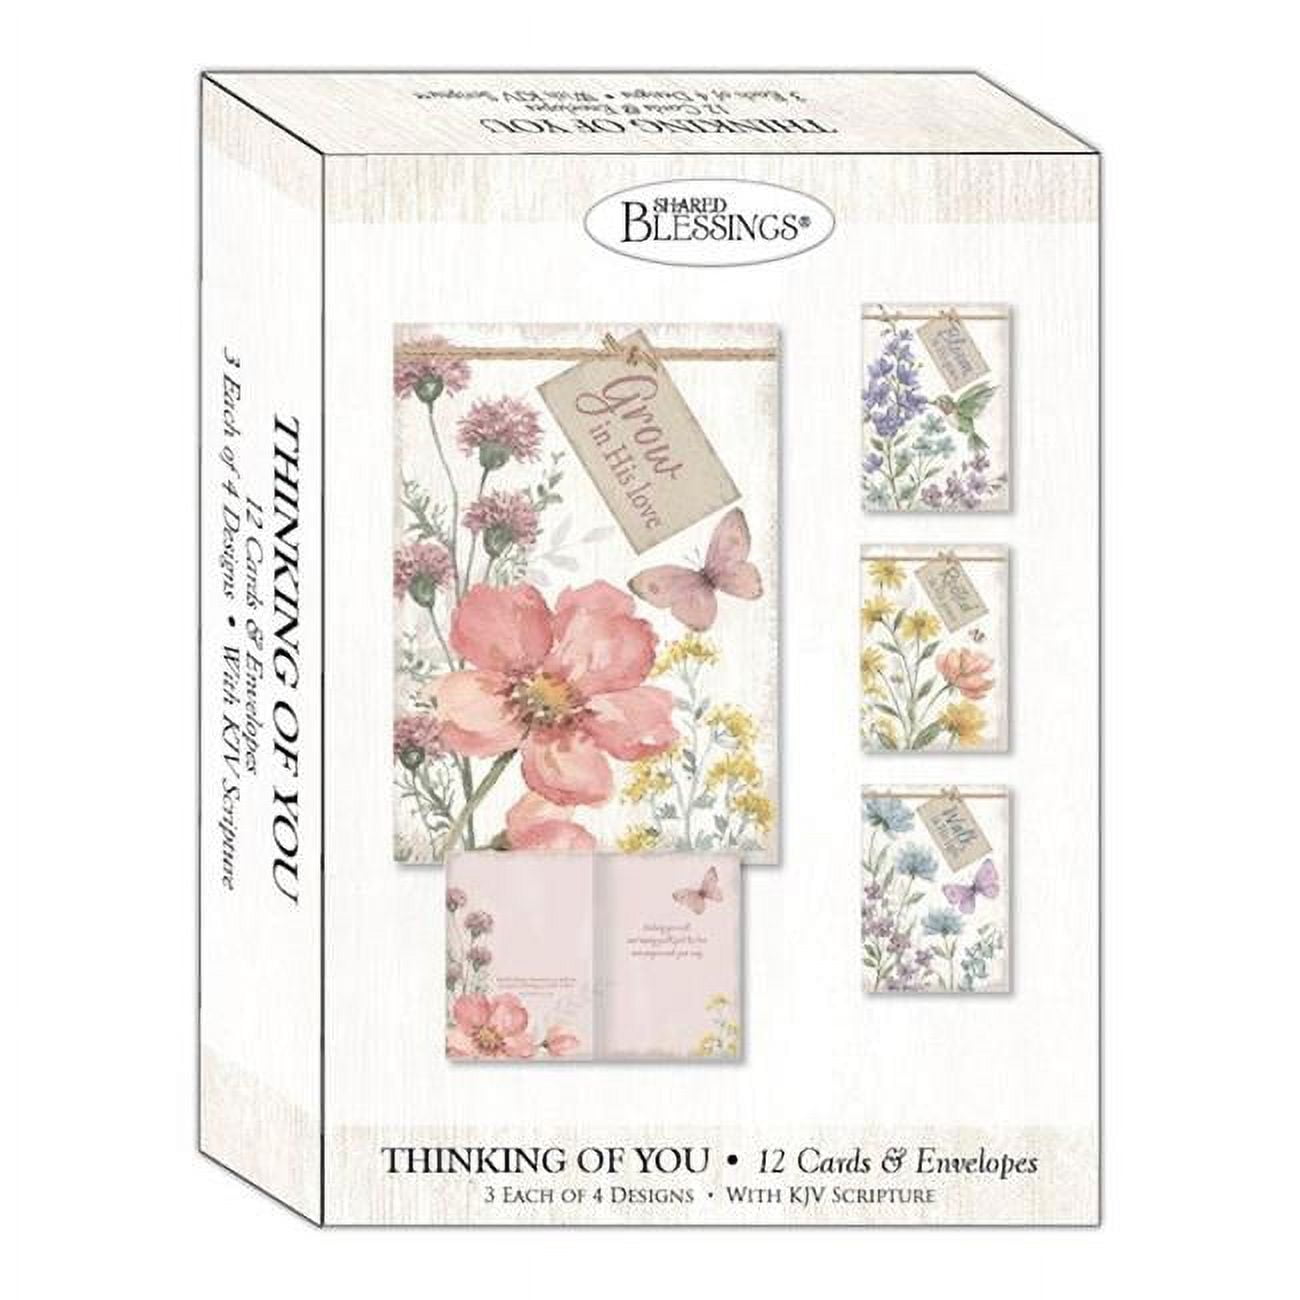 Picture of Crown Point Graphics 299539 Shared Blessings-Thinking of You-Peaceful Garden Boxed Card - Pack of 12